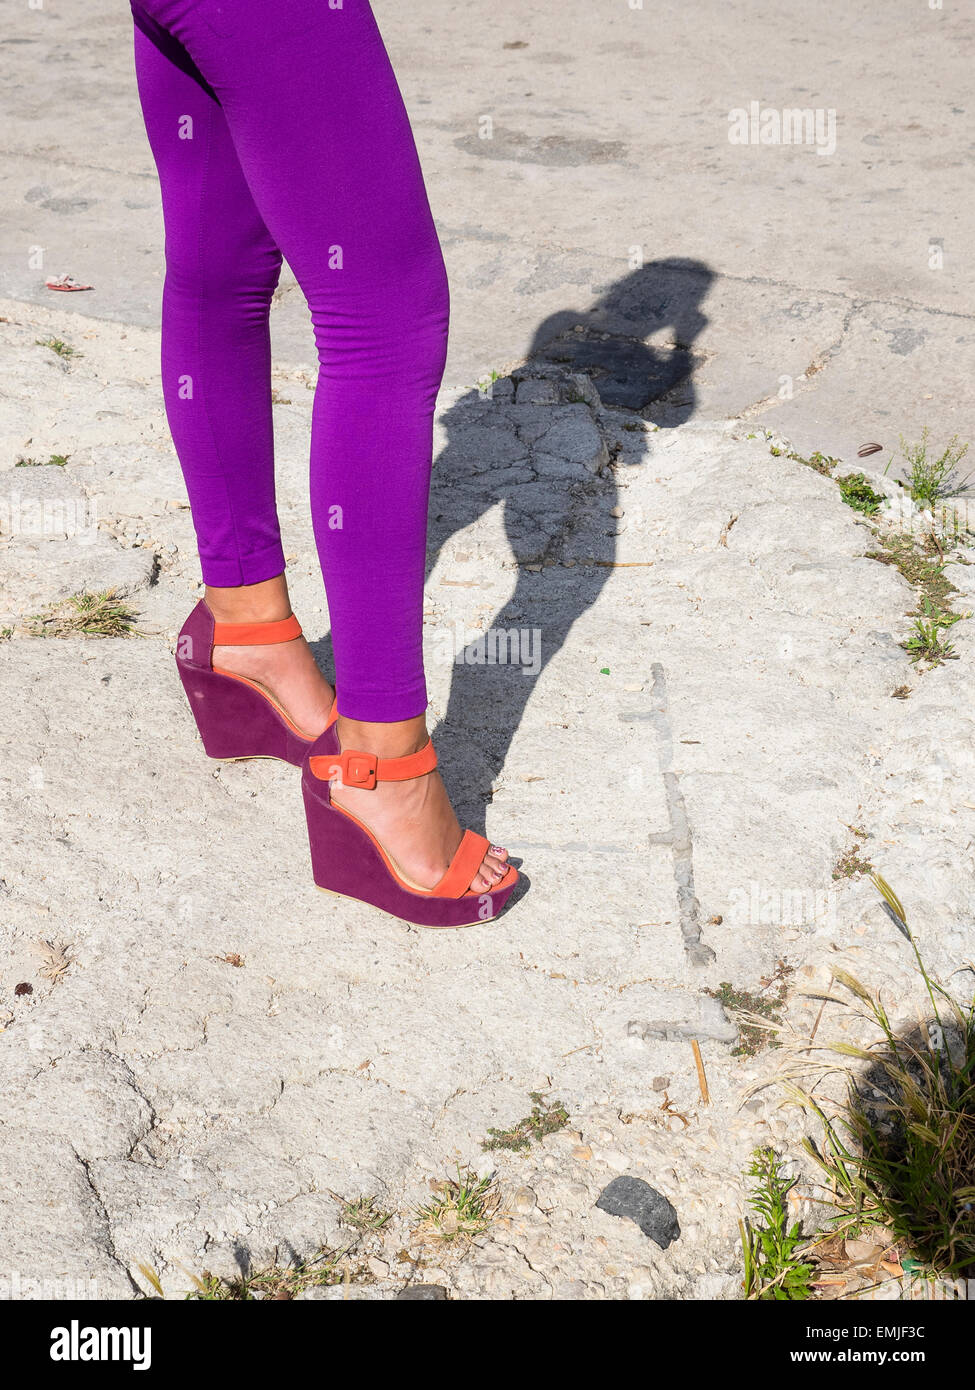 An image of a woman's purple tights, from waist down and purple and orange shoes. The woman casts a full figure shadow. Stock Photo